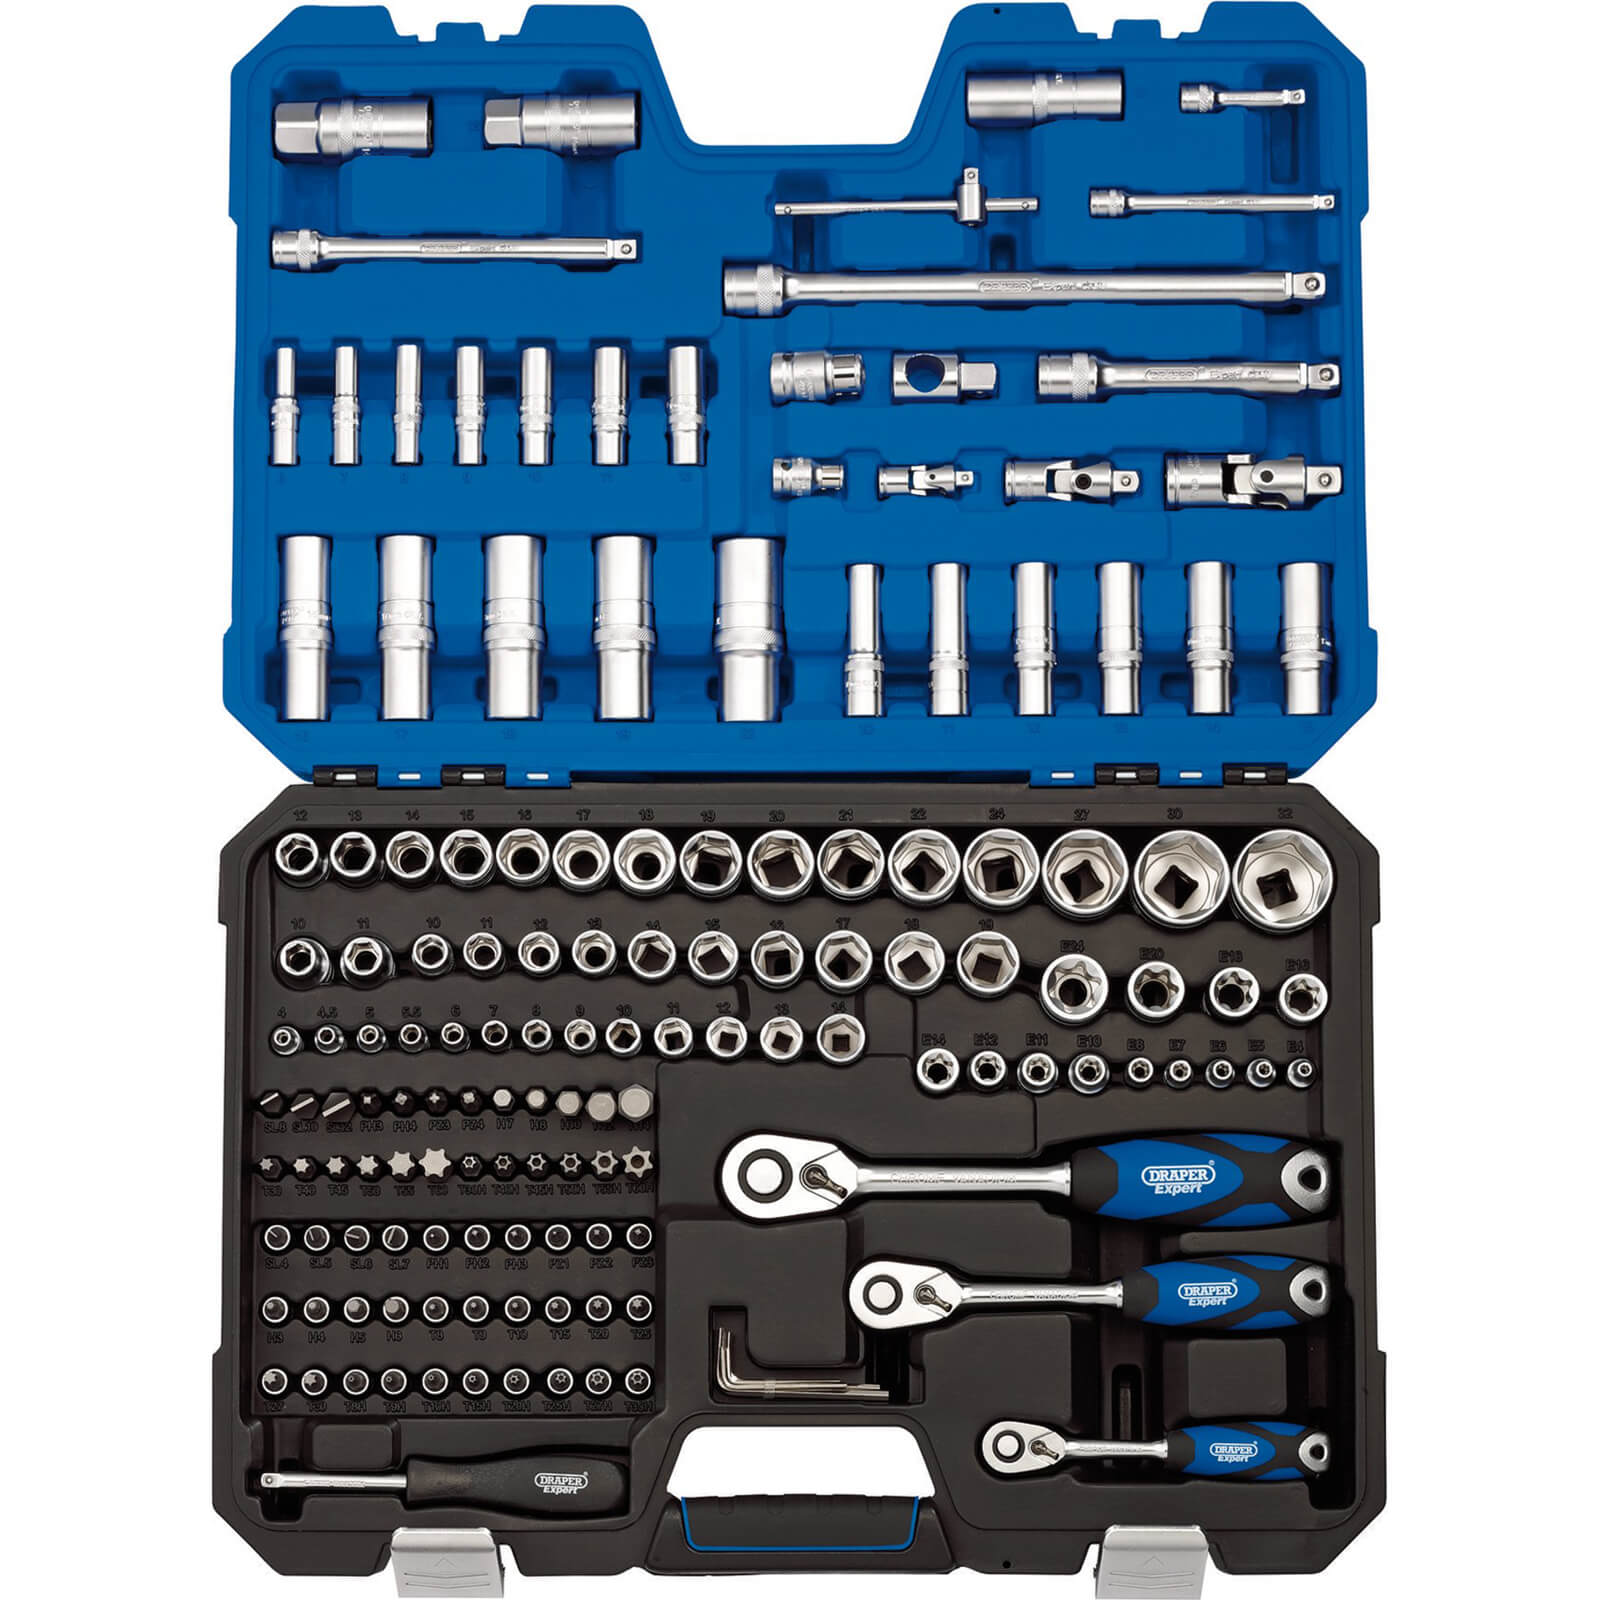 Image of Draper 149 Piece Combination Drive Hex Socket and Screwdriver Bit Set Metric and Imperial Combination